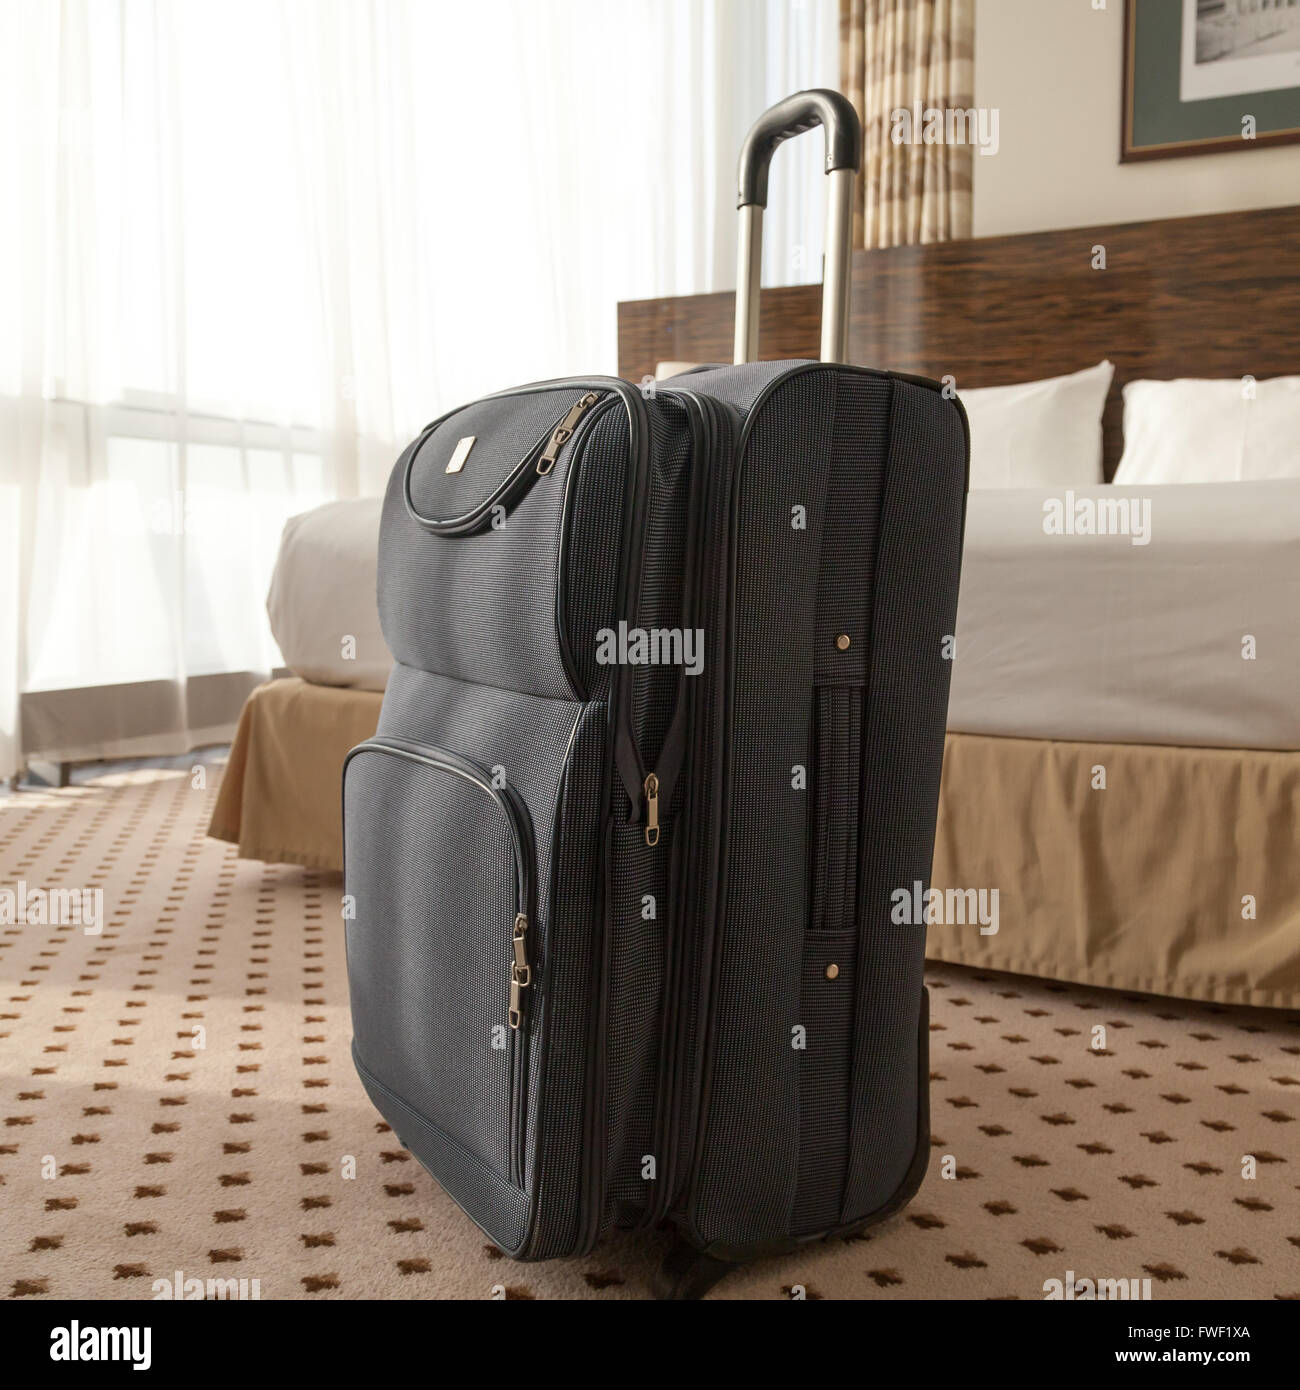 Large blue wheeled suitcase standing on the floor in the hotel room. Travel lifestyle concept. Square image Stock Photo